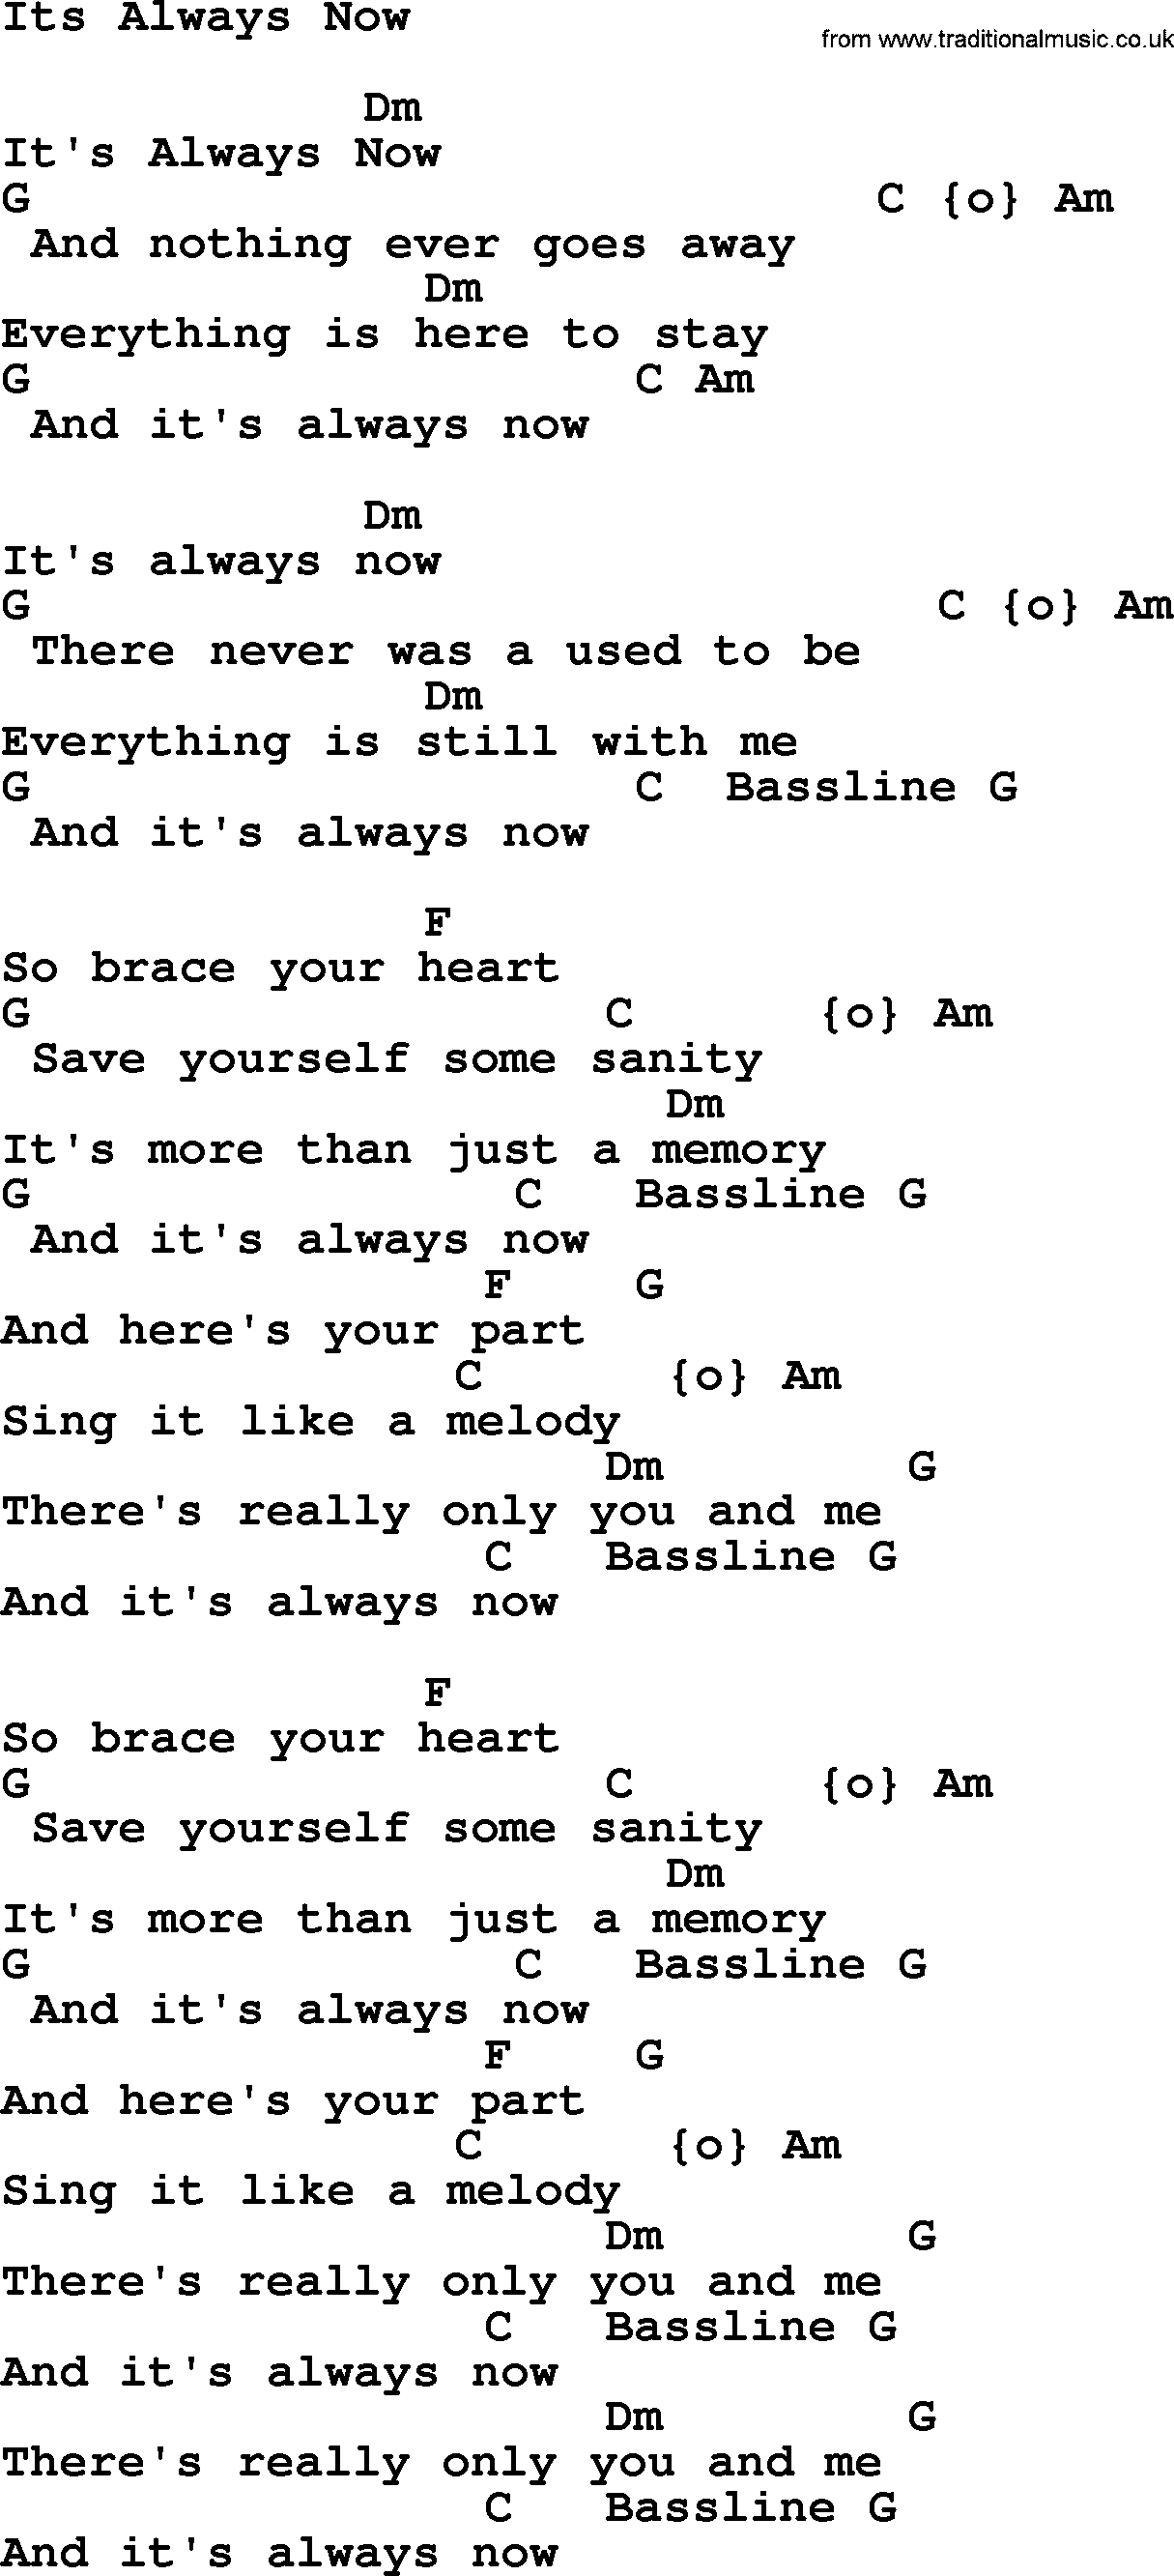 Willie Nelson song: Its Always Now, lyrics and chords